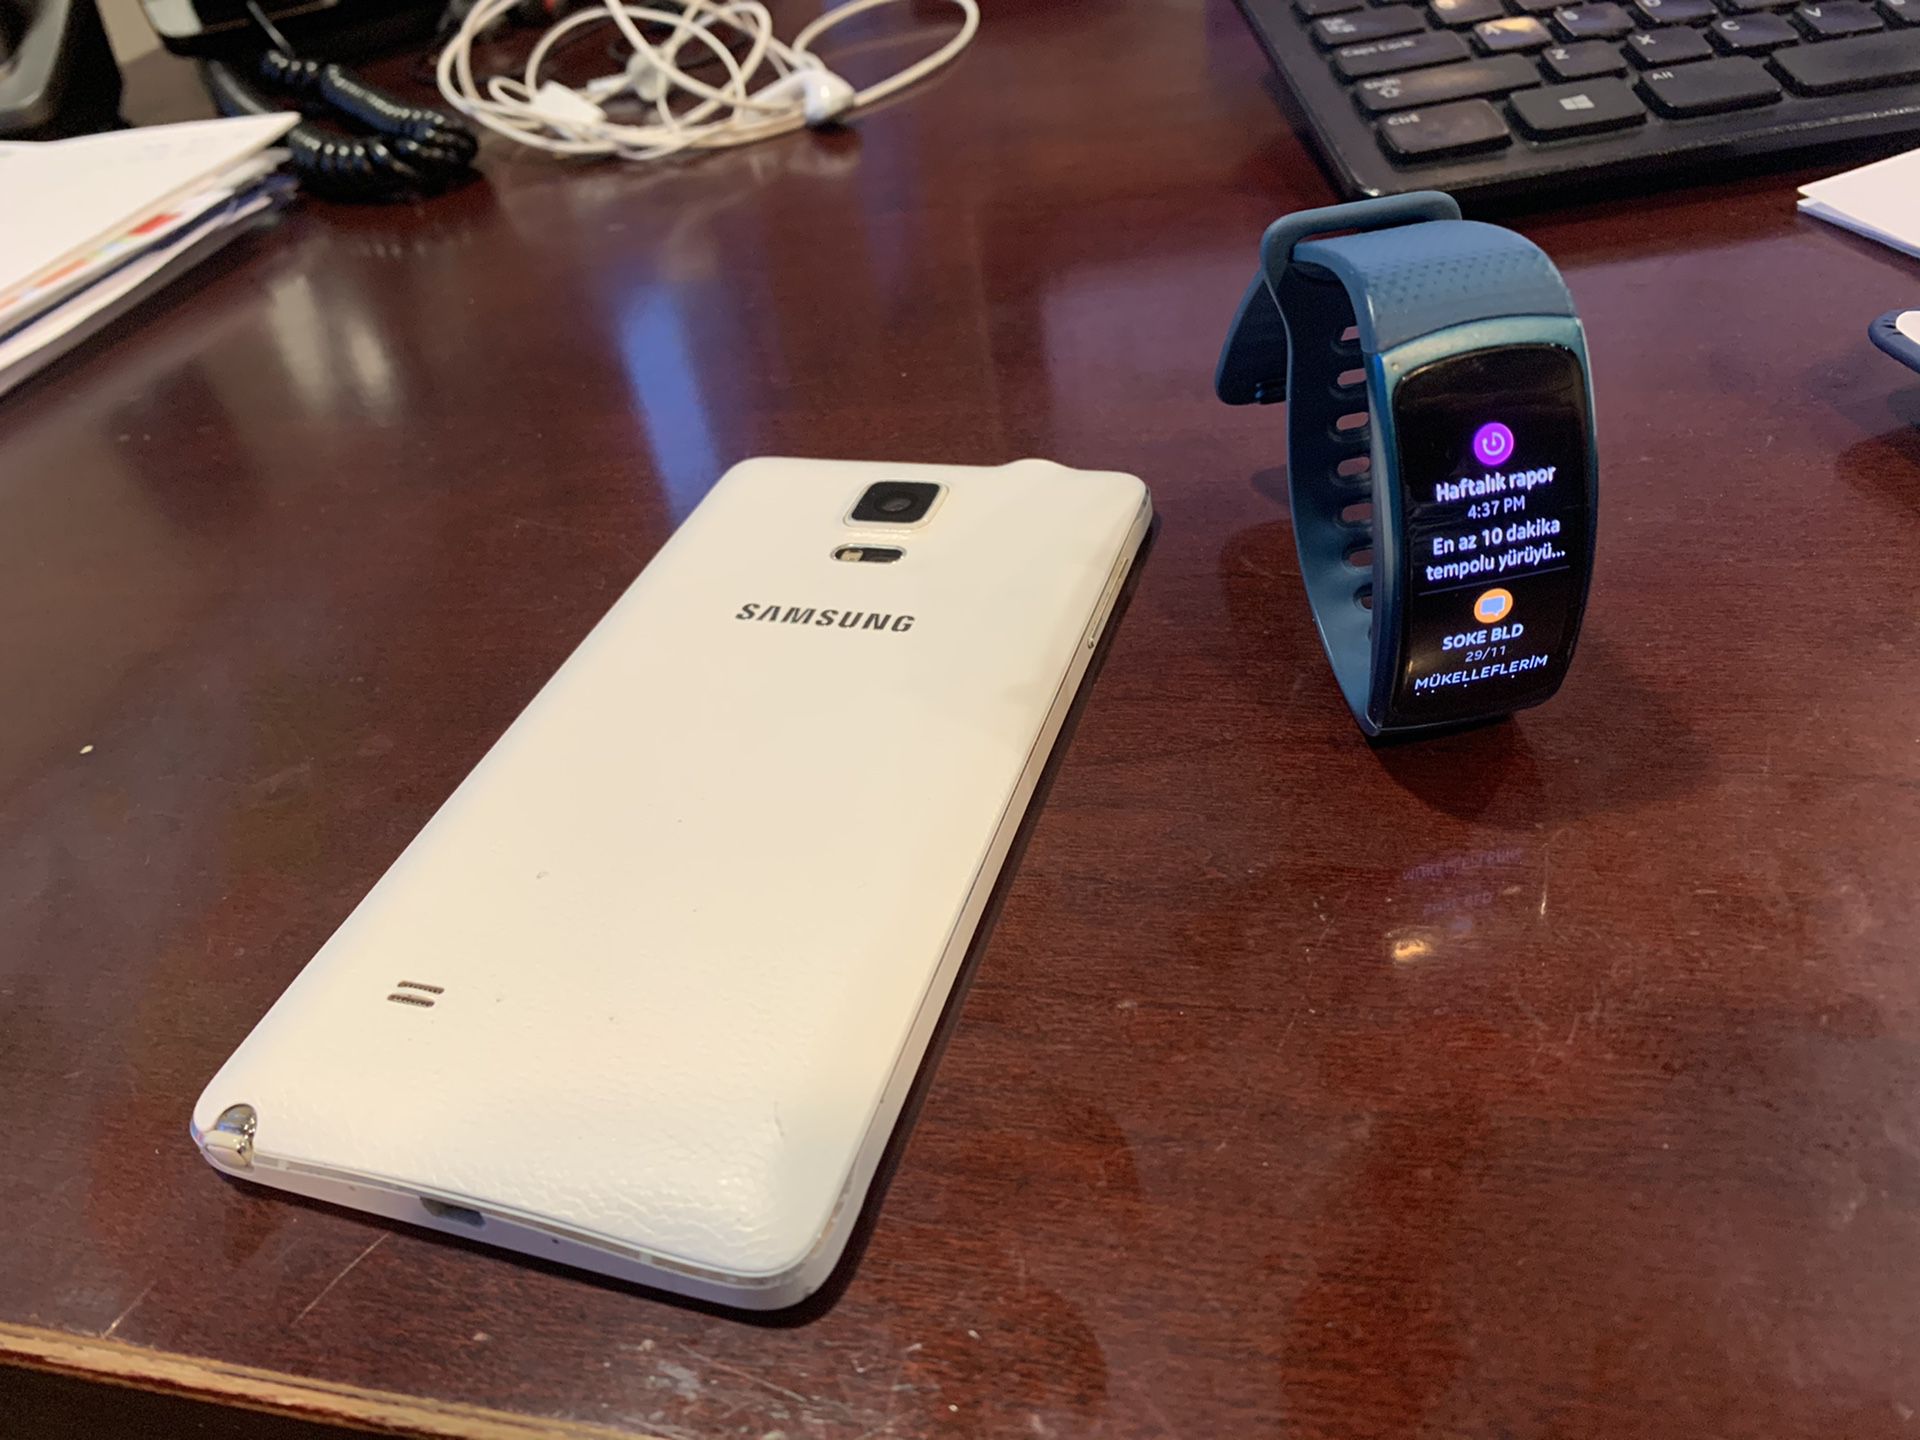 Samsung Note4 telephone and Samsung Gear fit2 smart watch